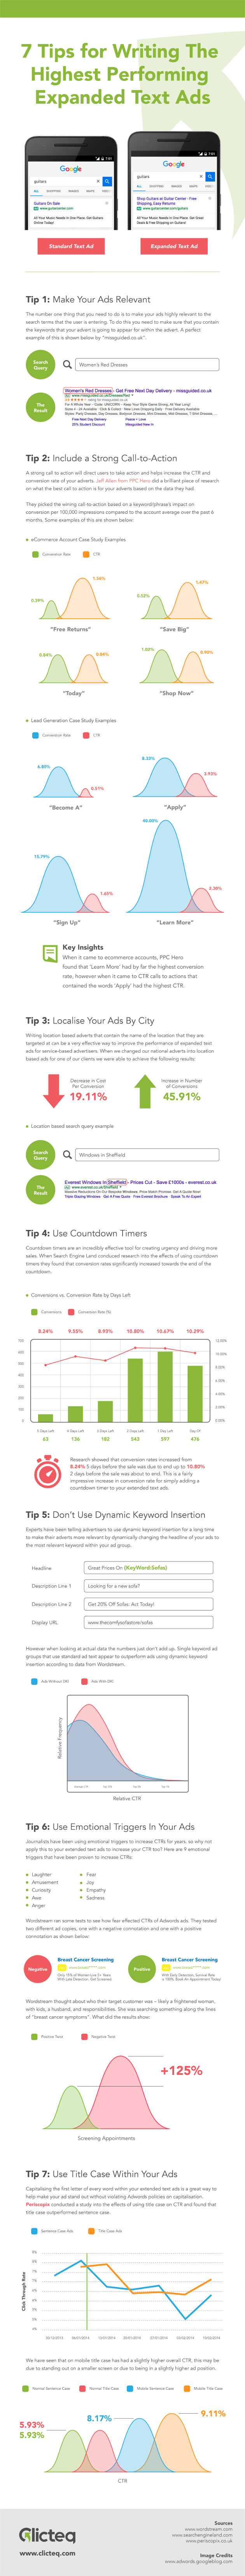 Better-Performing Fast Expanded Text Ads [Infographic]